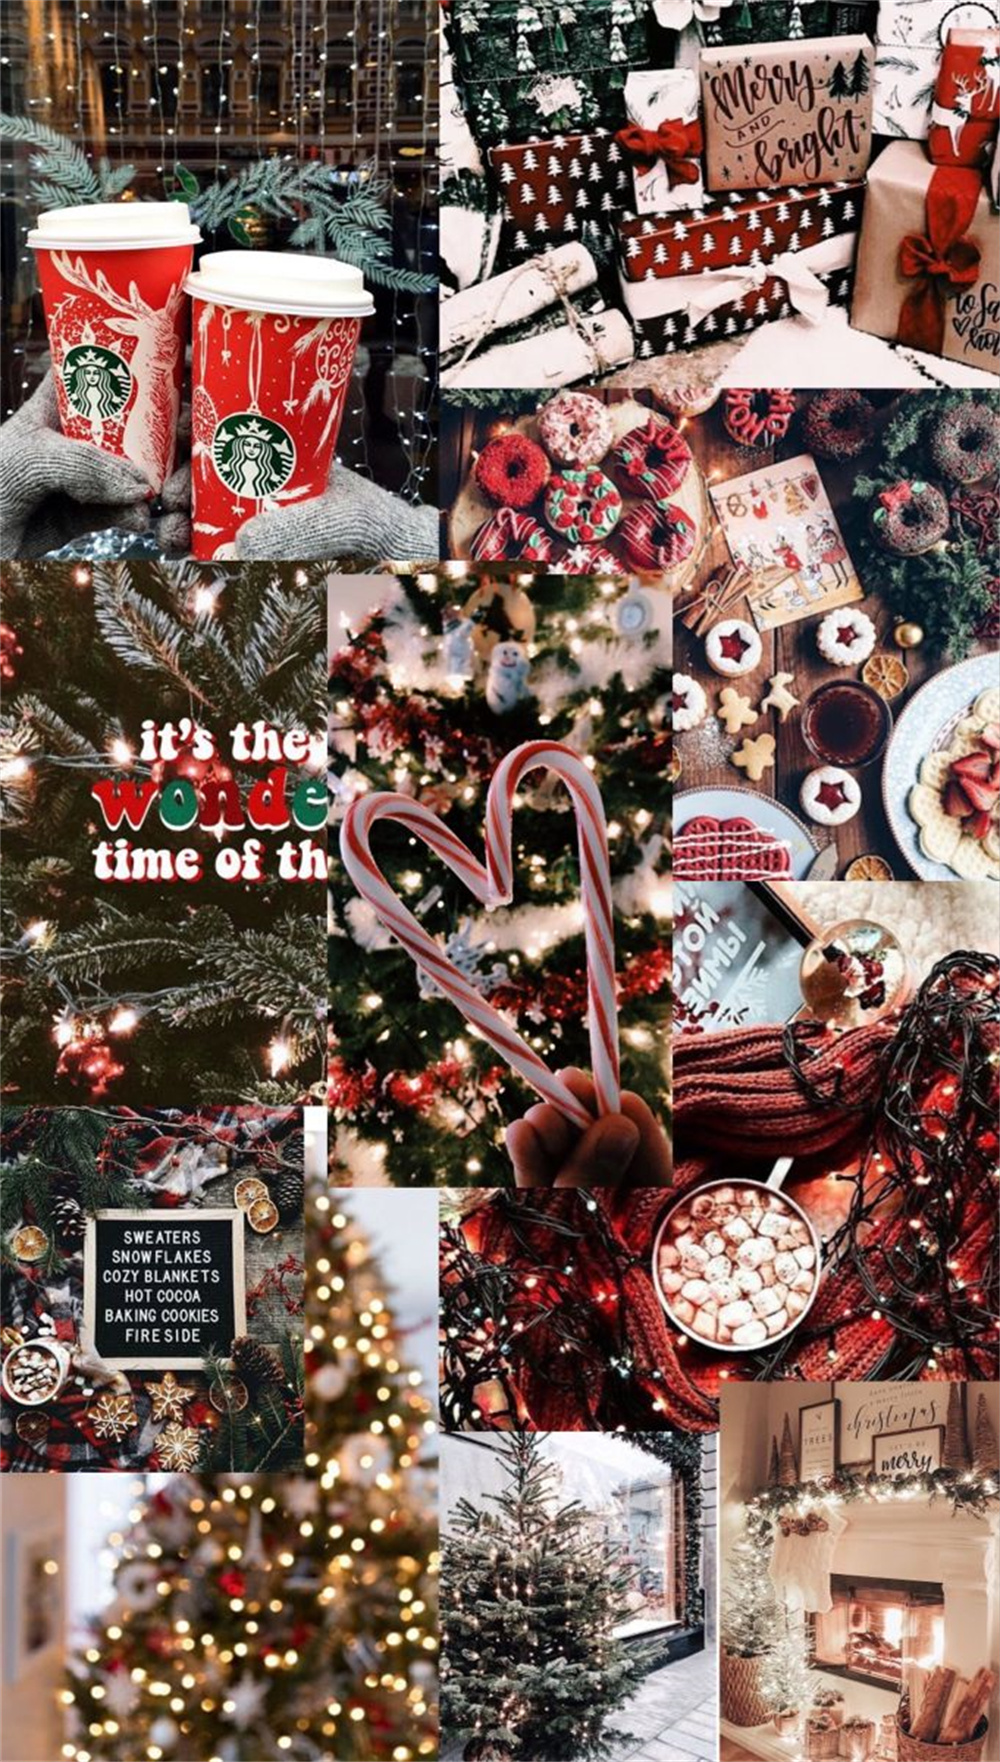 Aesthetic and Fun Christmas iPhone Wallpaper Ideas